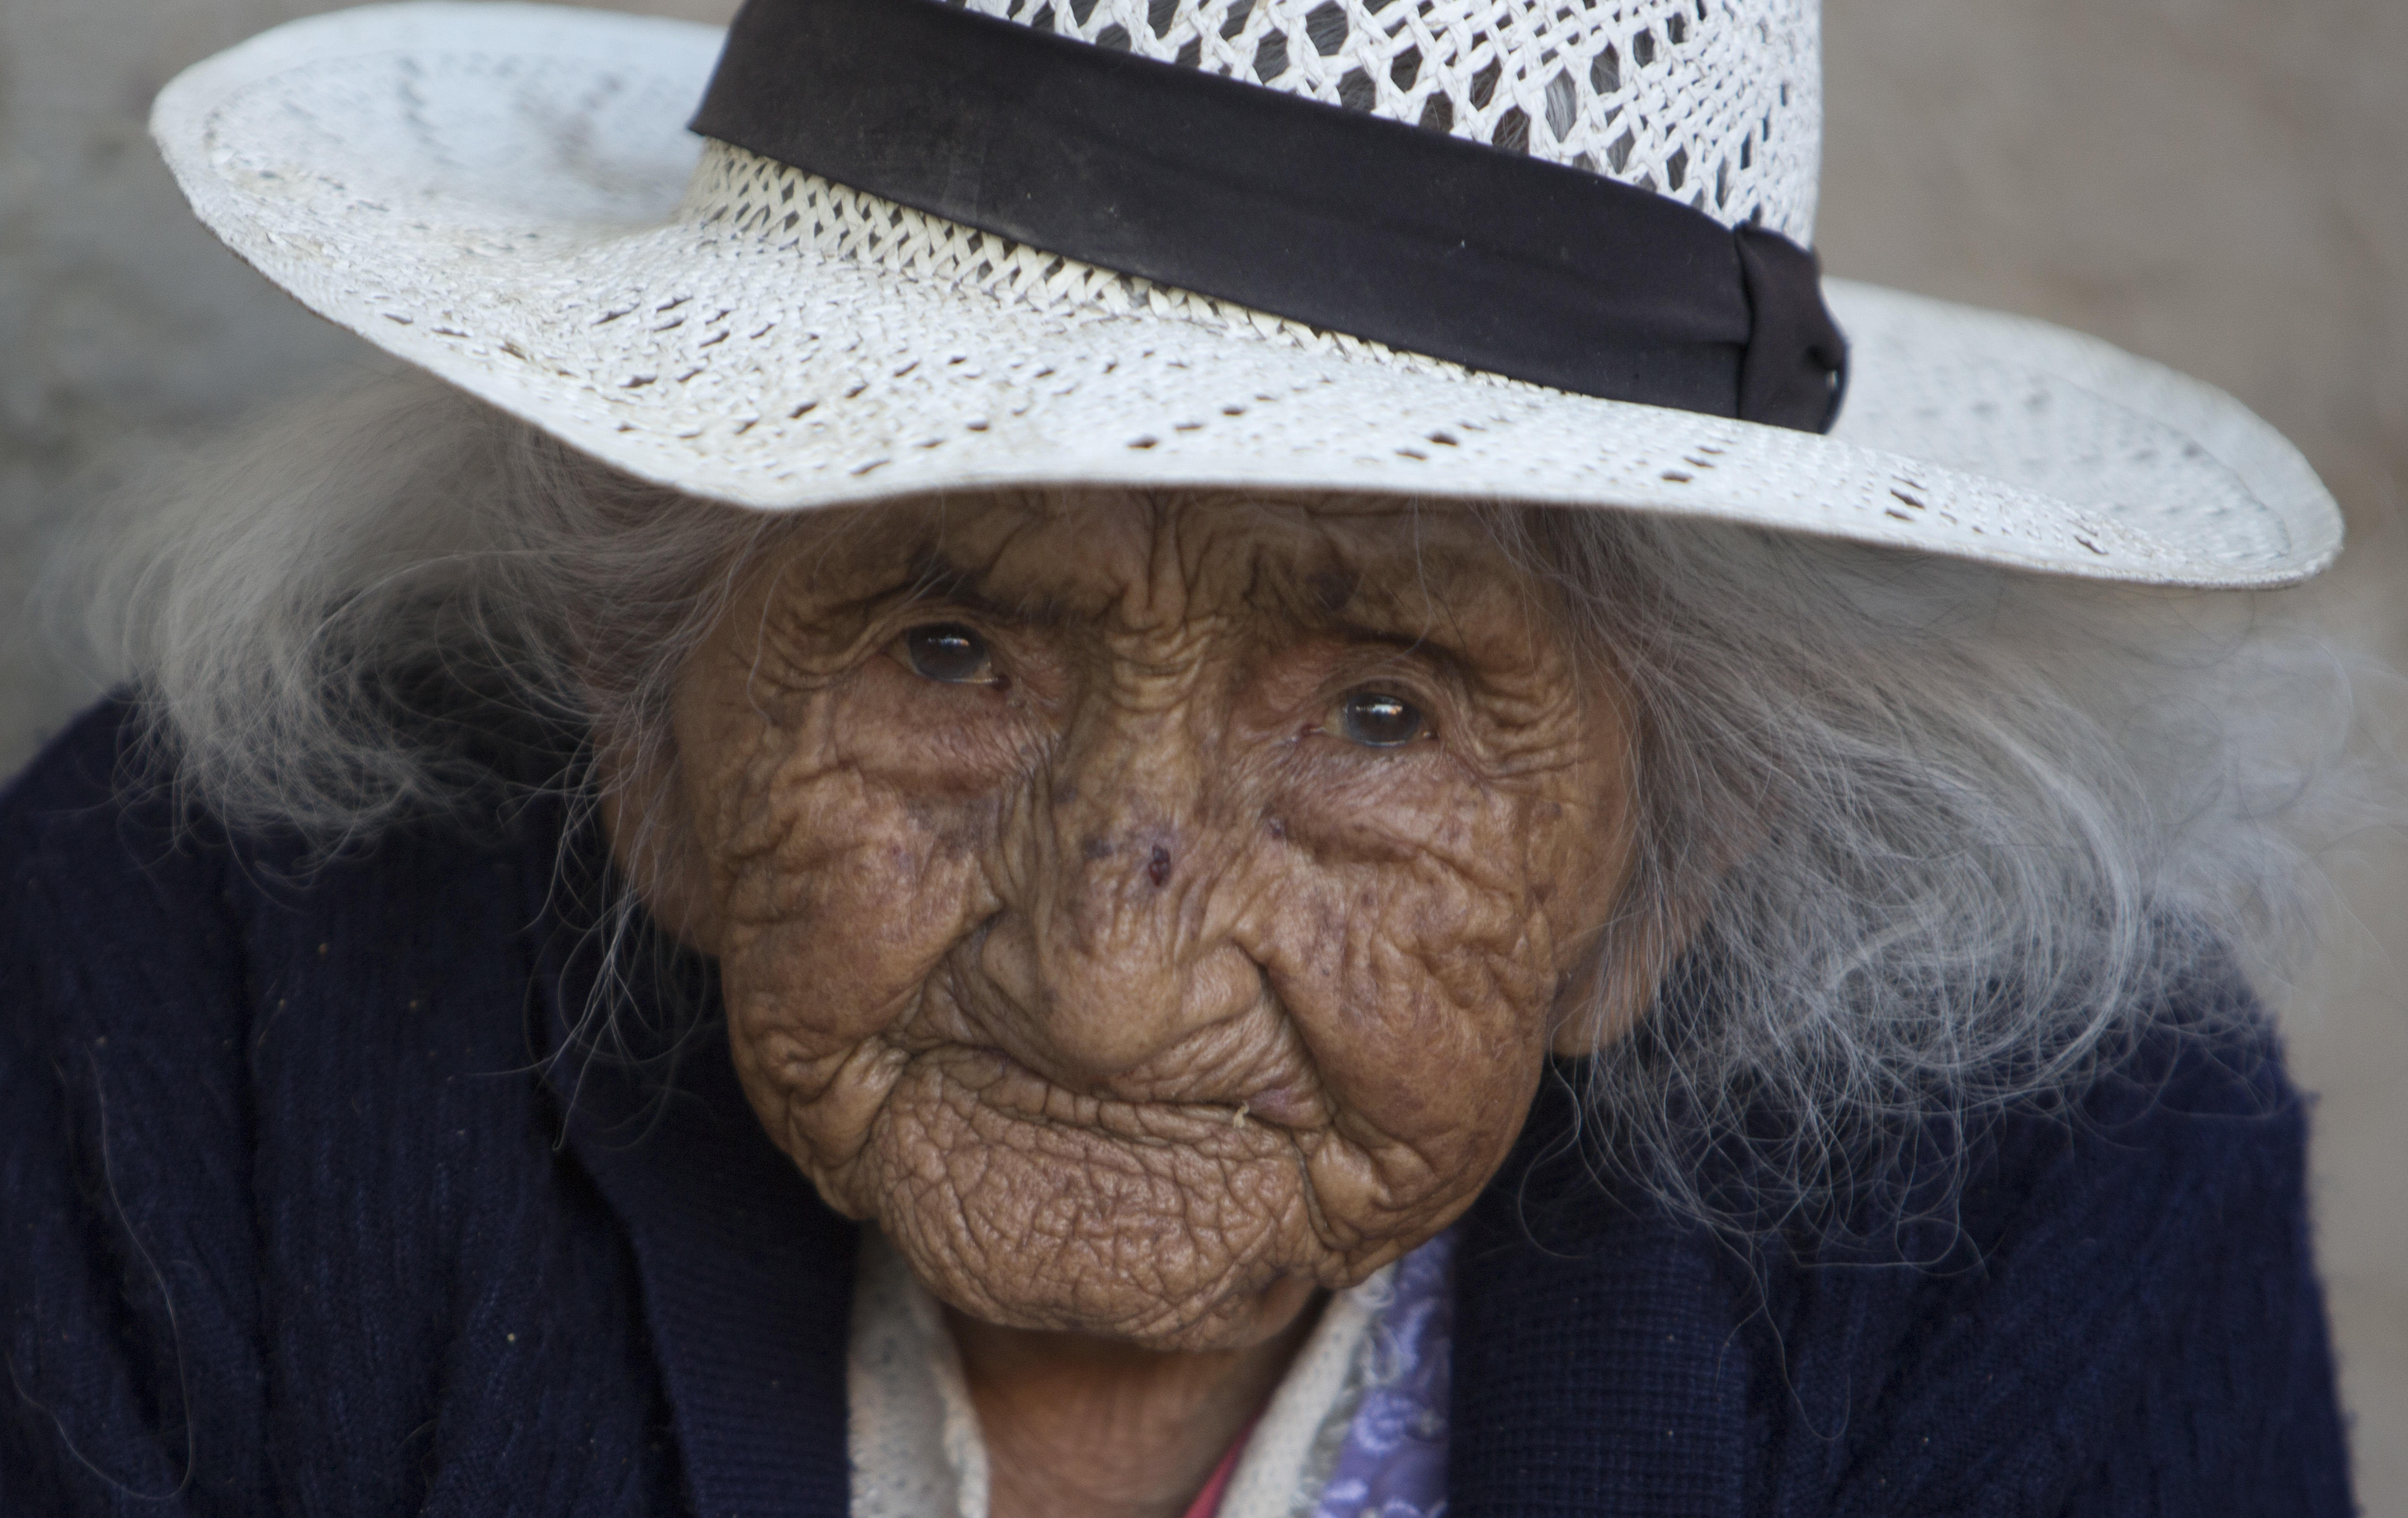 Bolivian Julia Flores Colque may be world's oldest living woman, but she's never heard of